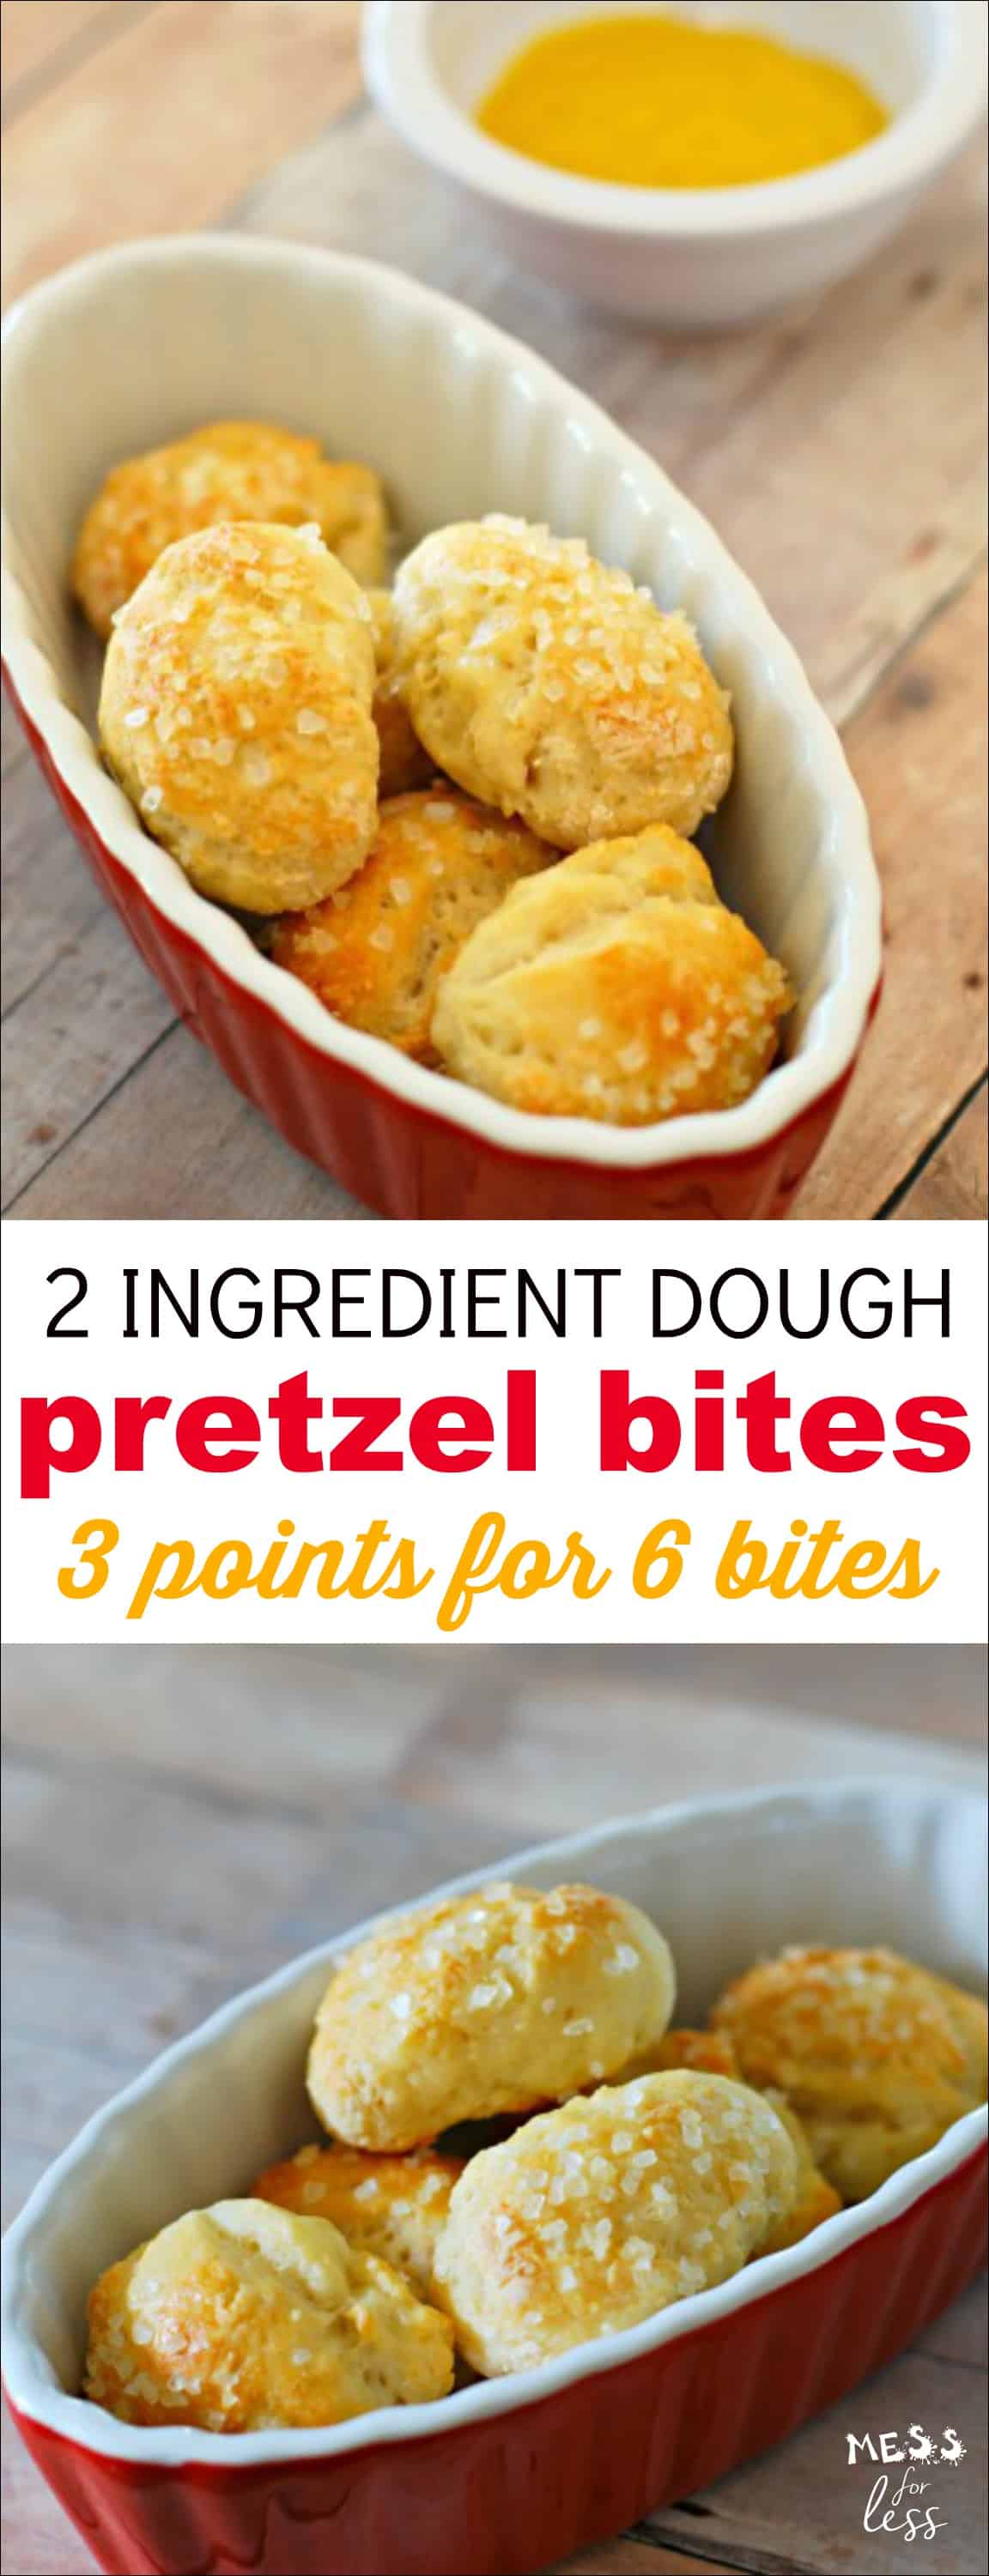 Weight Watchers friendly Two Ingredient Dough Pretzel Bites. Six pretzel bites are just 3 points on the Freestyle program so you can enjoy a yummy treat with no guilt. #weightwatchers #freestyle #twoingredientdough